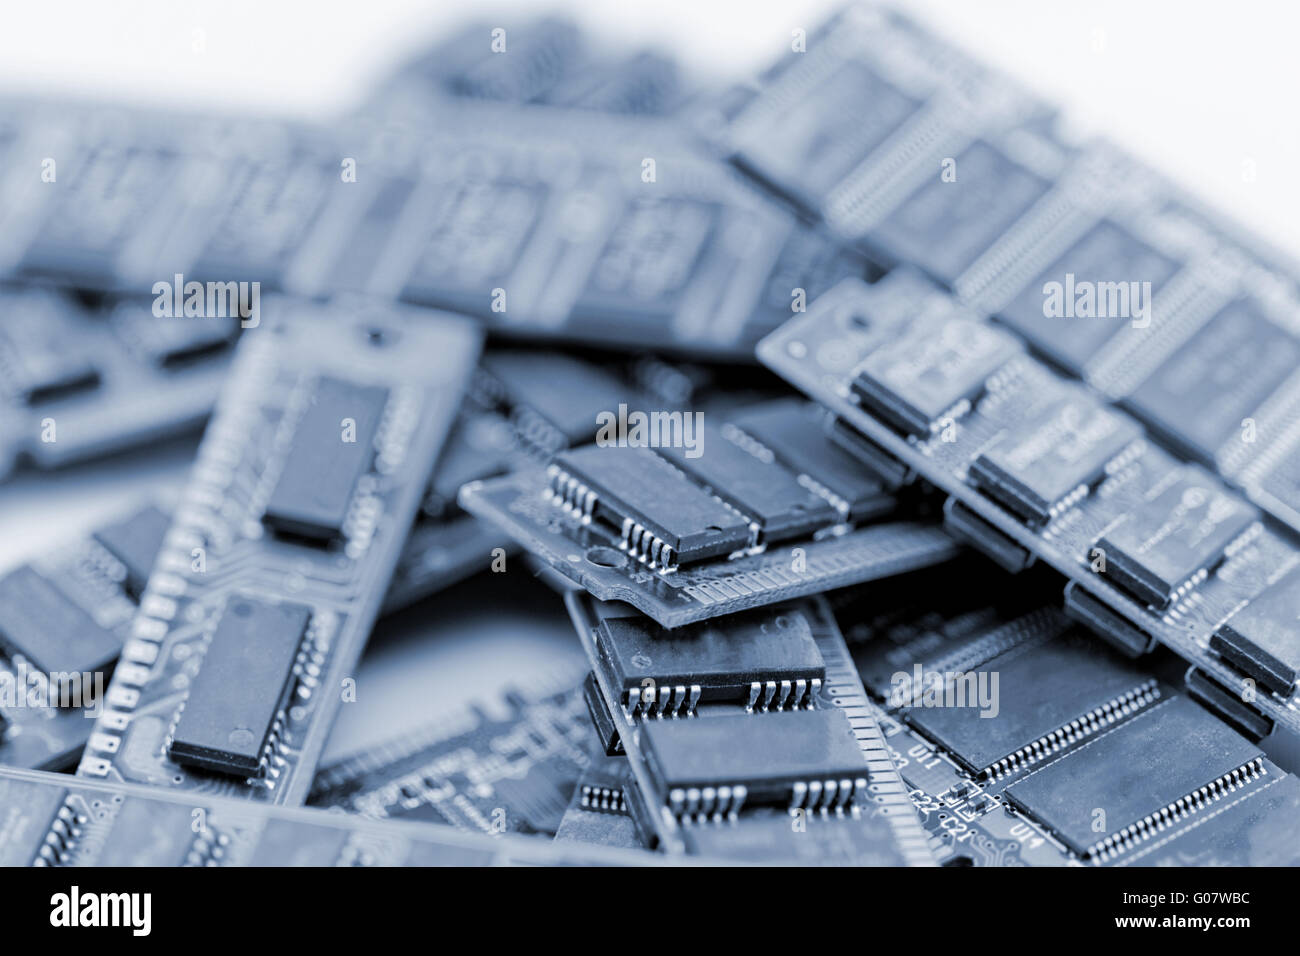 Many different computer memory modules in blue (RAM Stock Photo